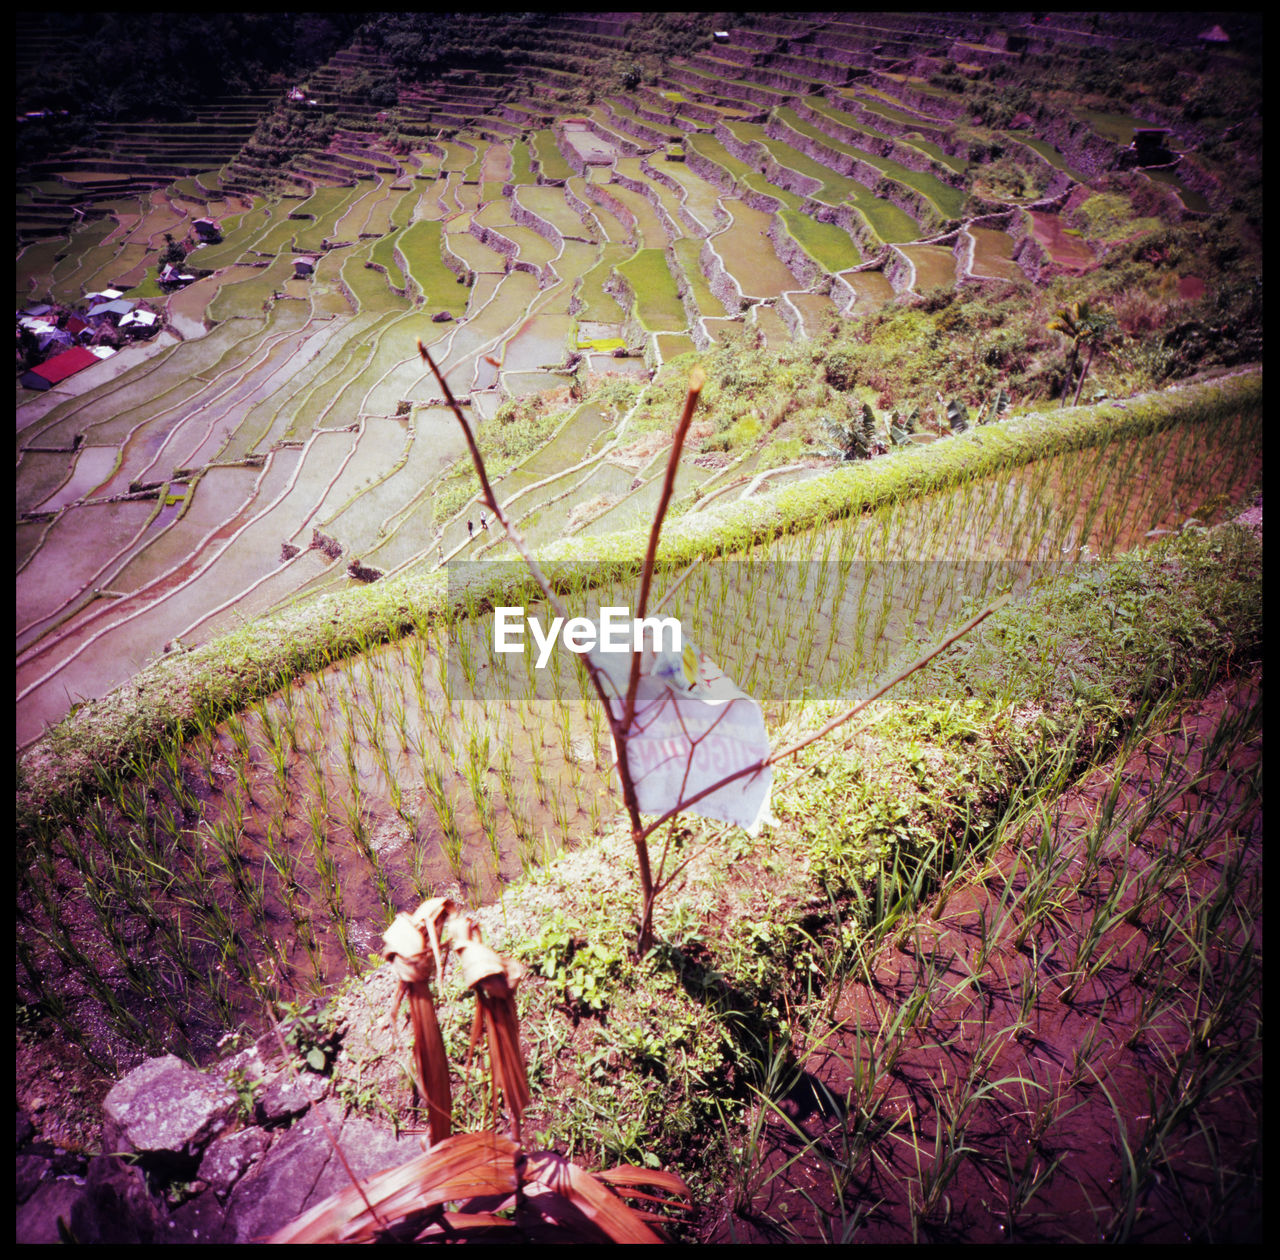 50 shades of rice Agriculture Analogue Photography ASIA Banaue Batad Farming In Philippines Green Rice Irrigation Lomography Medium Format Mountains Nature No People Philippines Rice Rice And Mountains Rice And Sky Rice Paddy Rice Terrace Stairways Rice Terraces Seedlings Slide Travel Young Rice